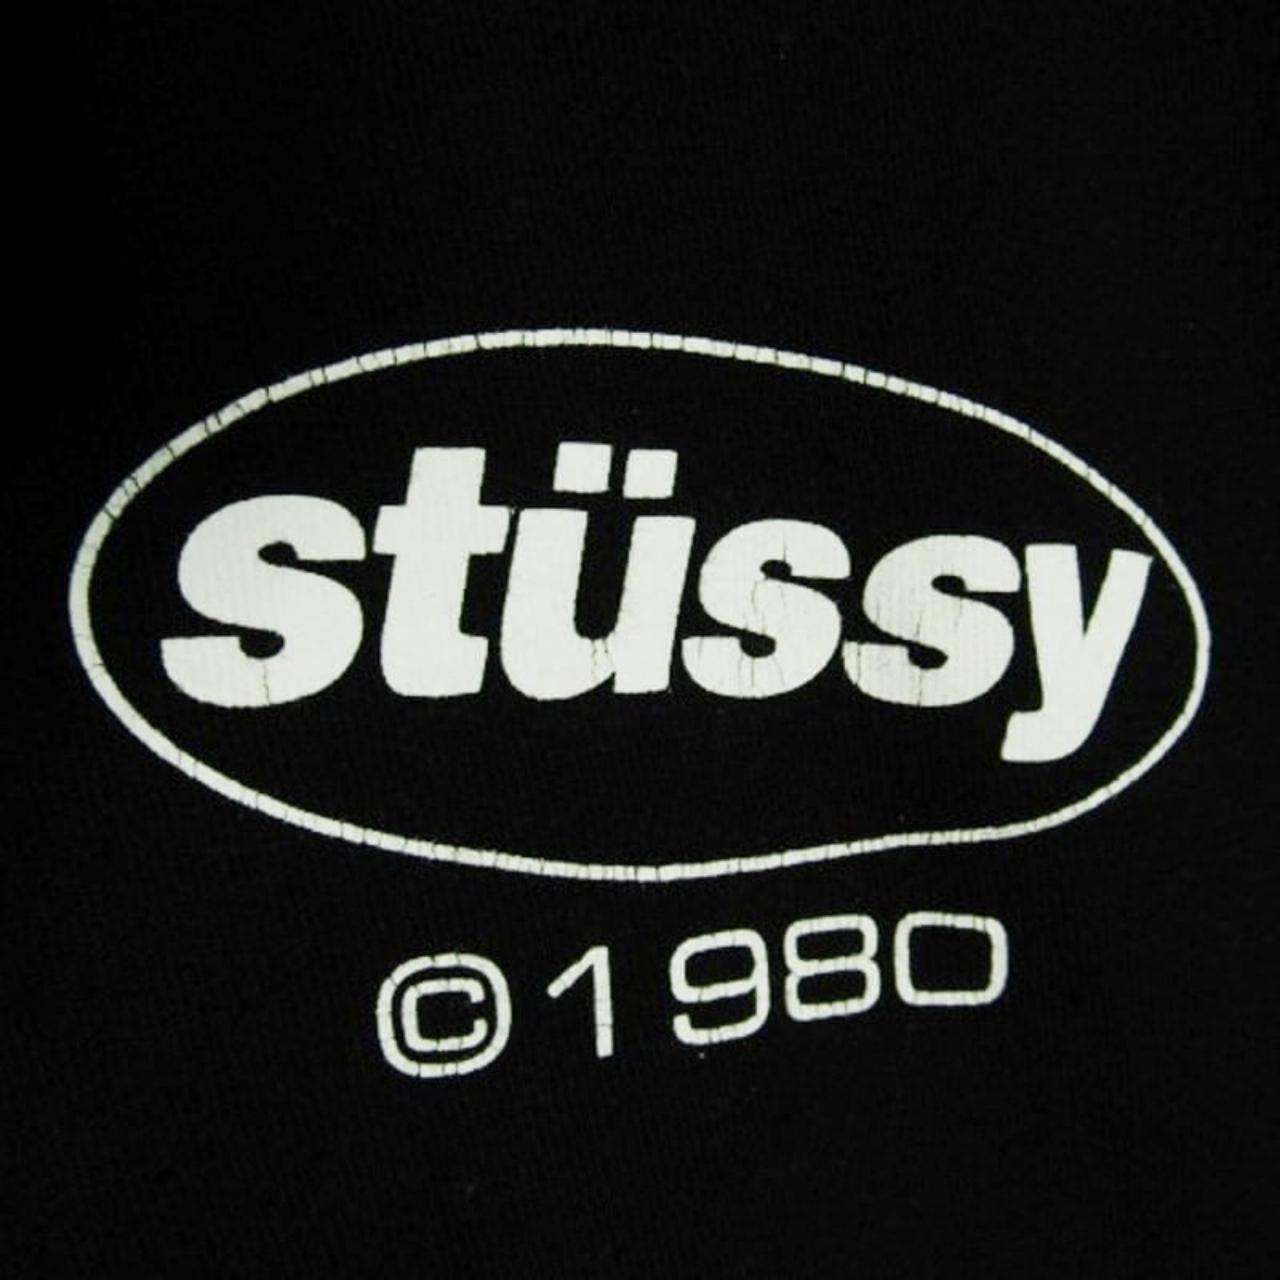 Stussy @1980s front and back T-shirt short sleeve black - Known Source